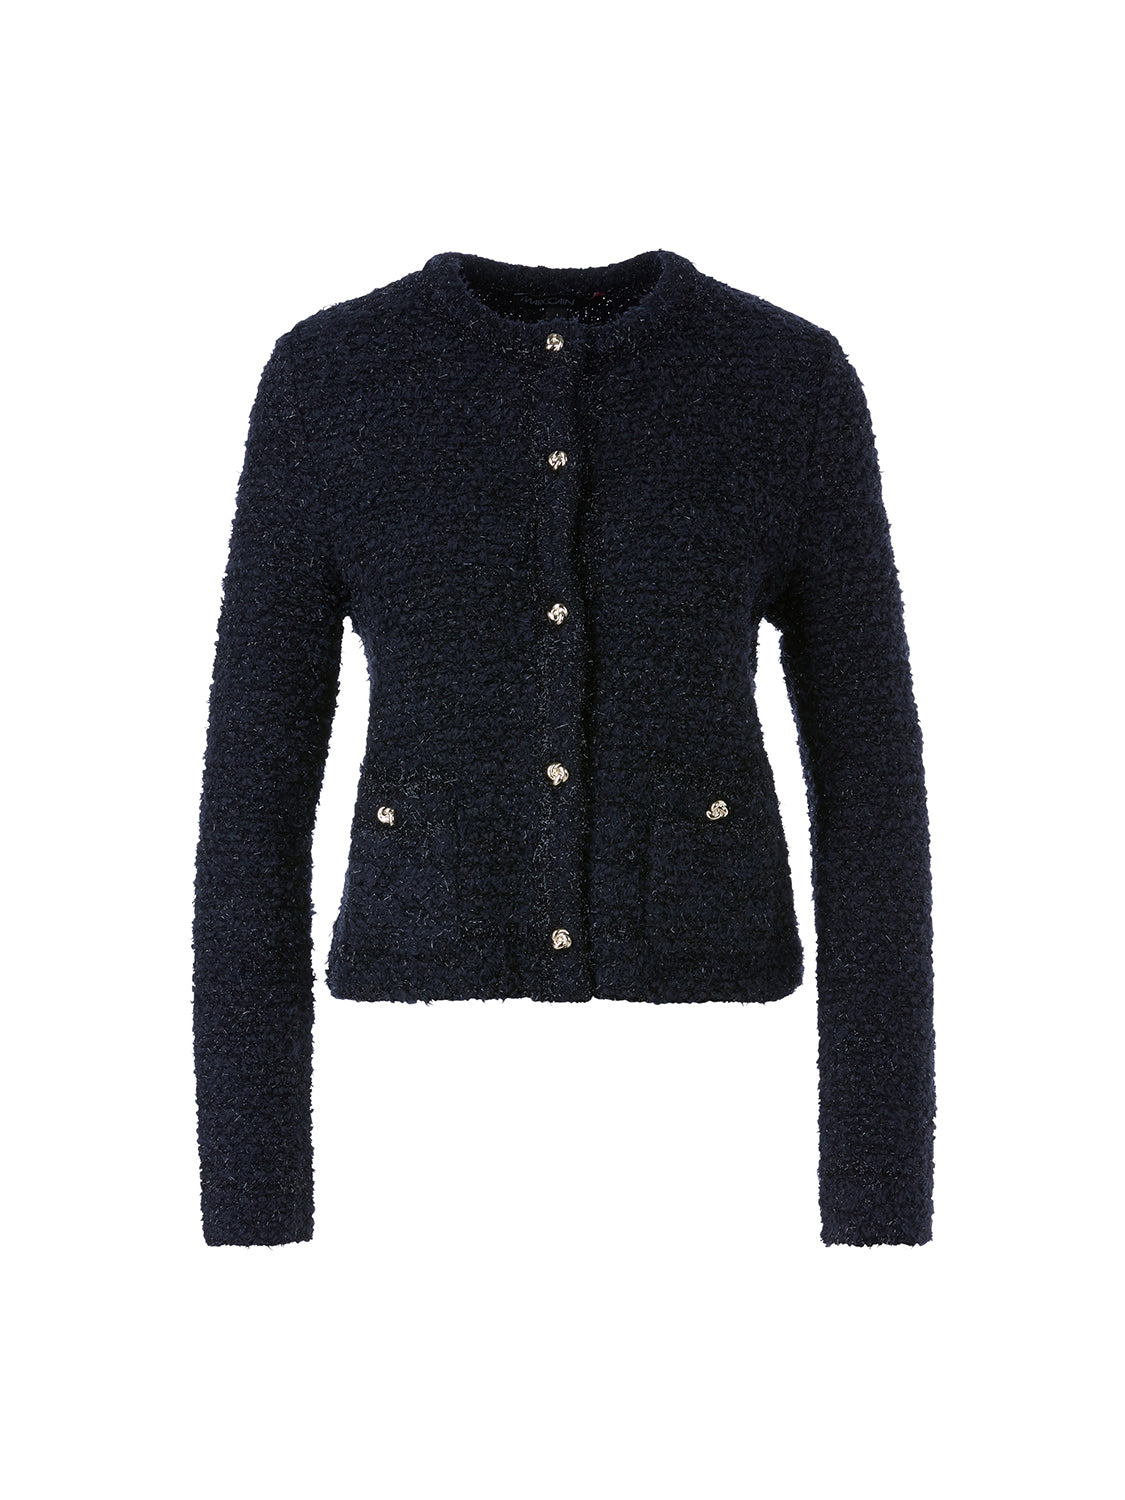 Marc Cain Cardigan Knitted in Germany WC 39.03 M01